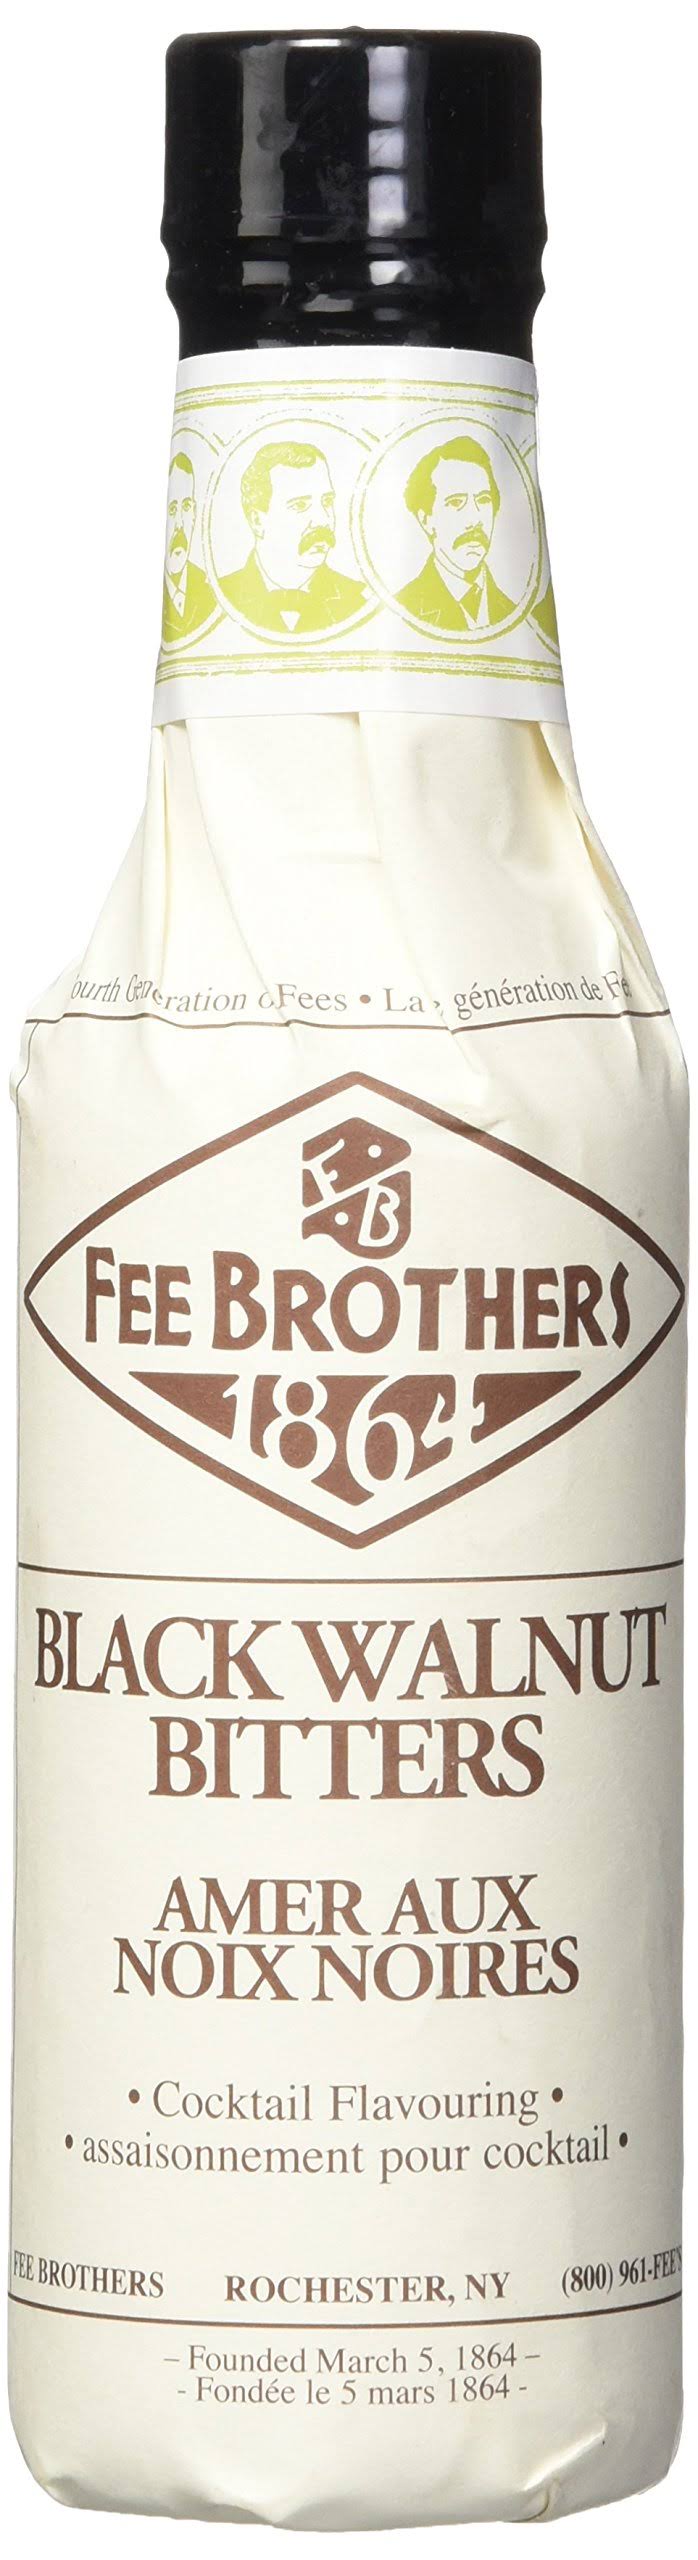 Fee Brothers Cocktail Flavouring - Black Walnut Bitters